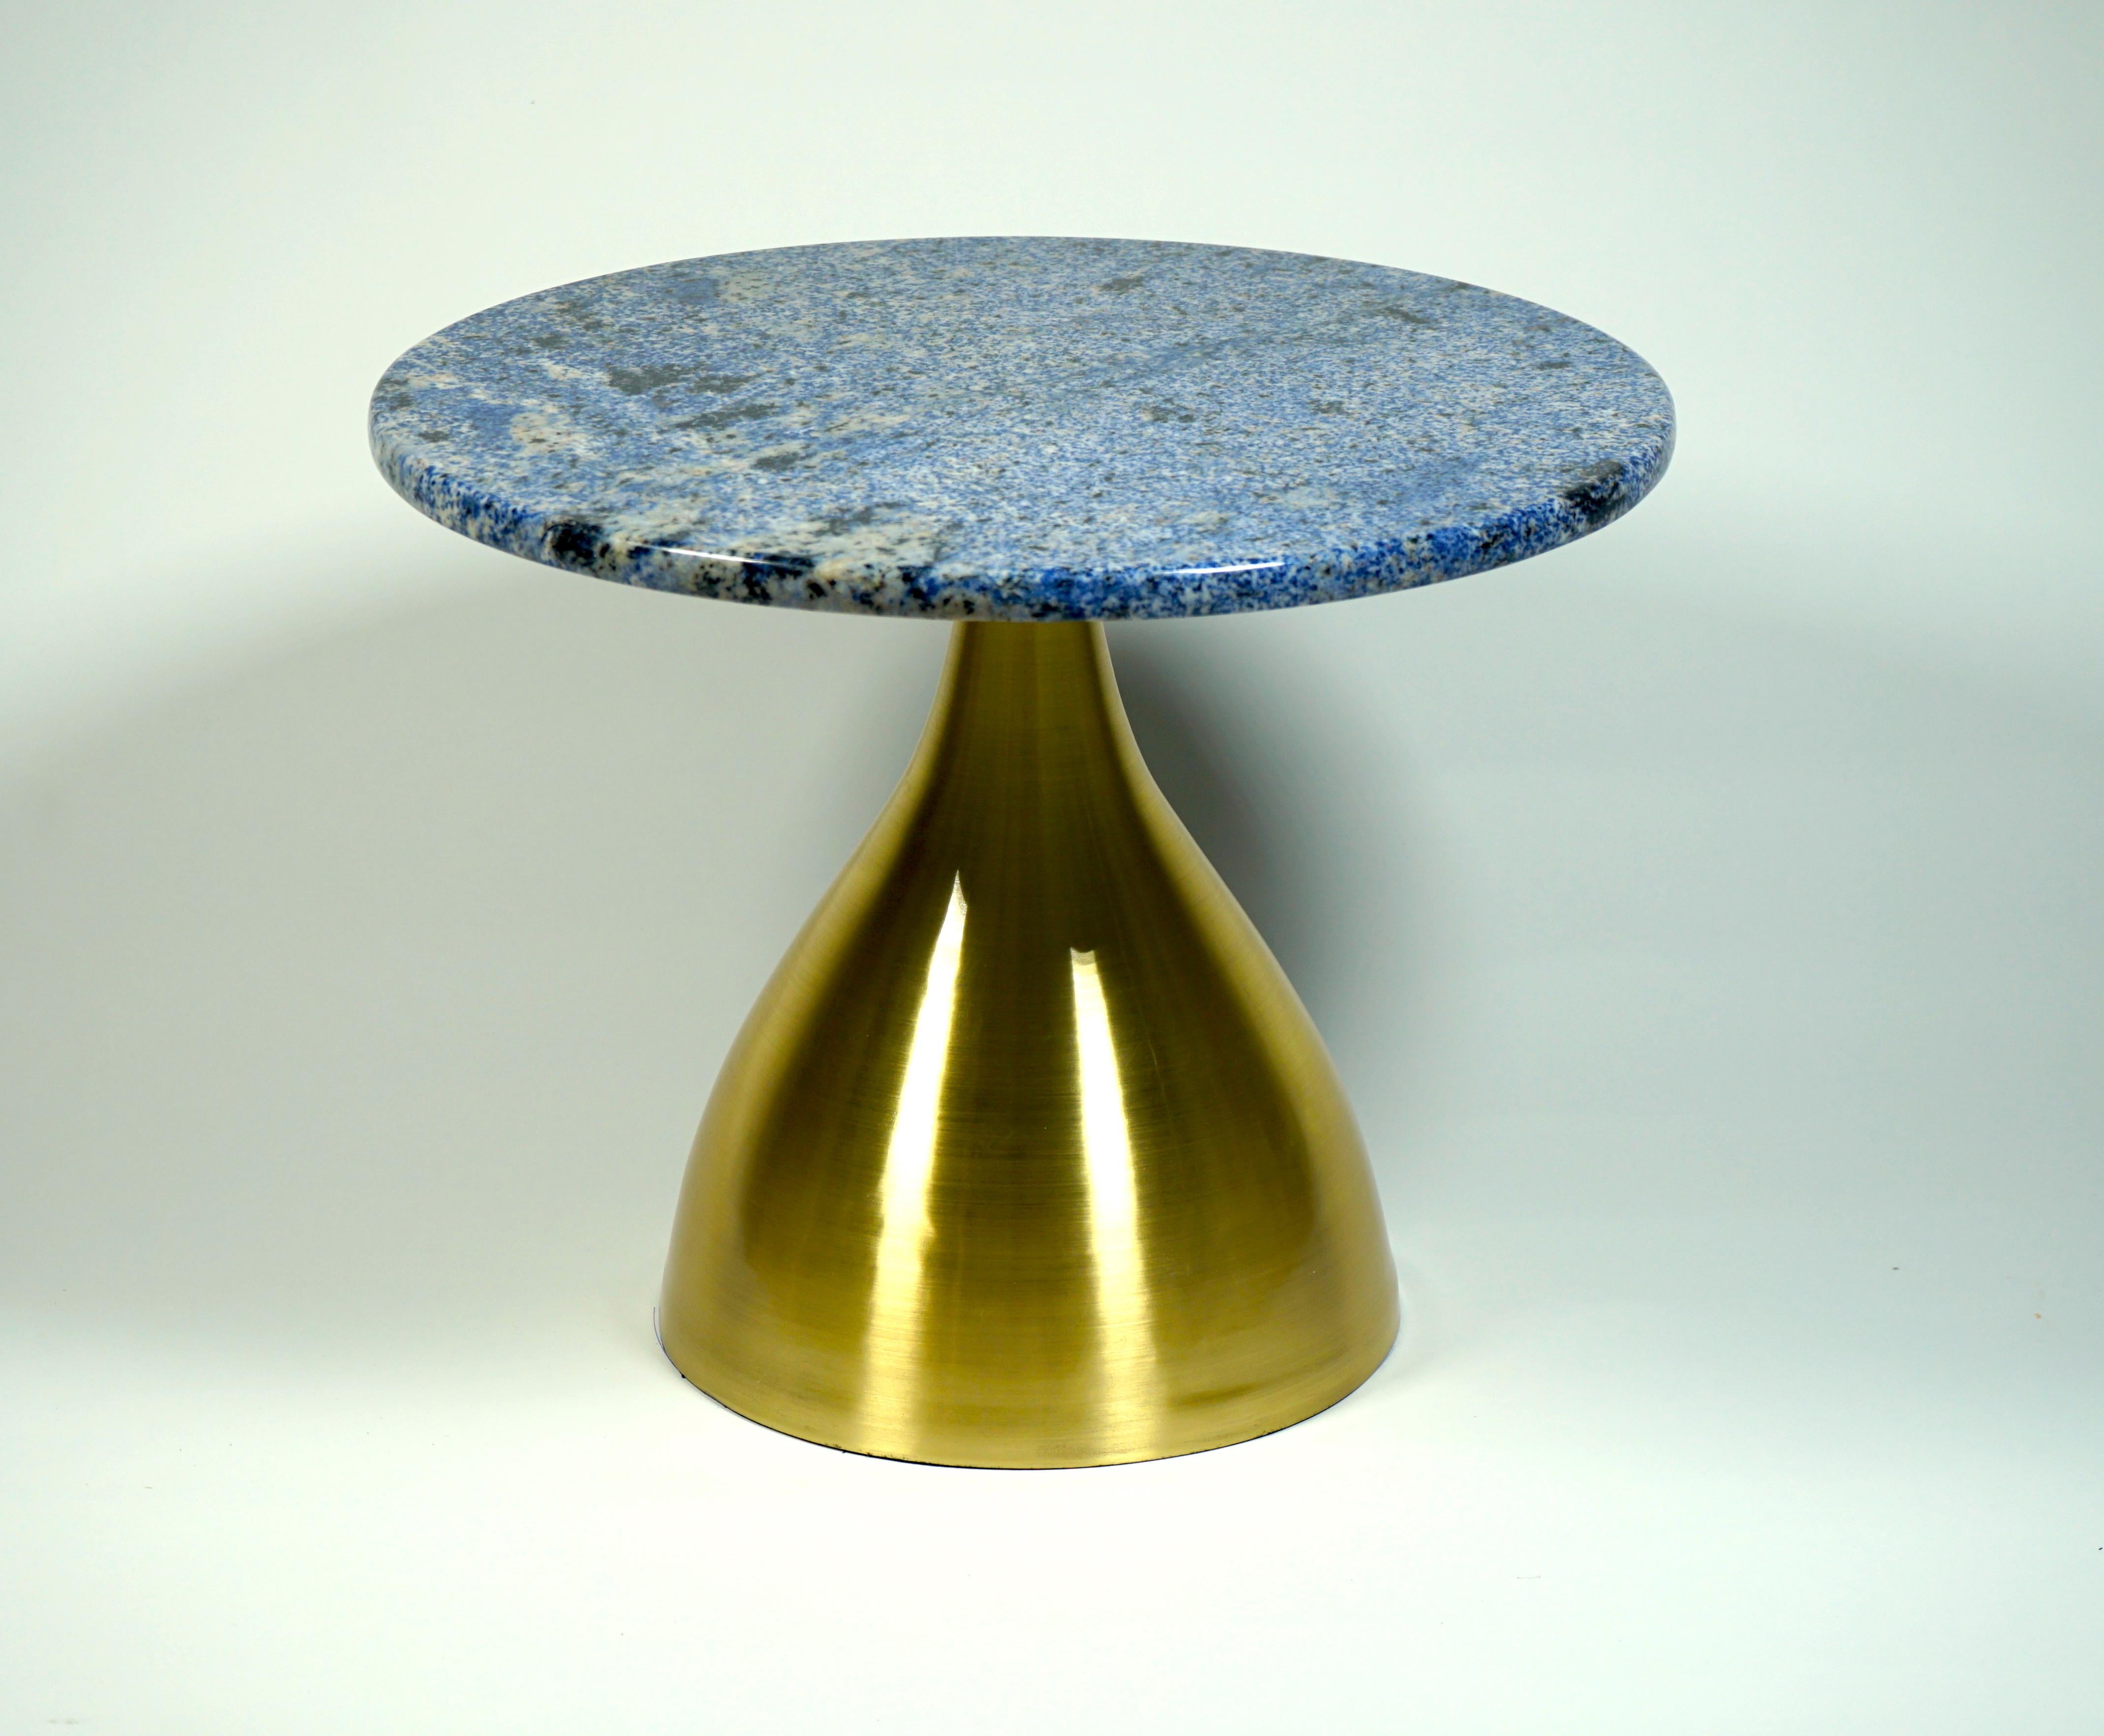 Coffee table model Mushroom designed by Studio Superego for Superego Editions.
Low table handmade with satin brass leg and Azul Bahia marble top.

Biography:
Superego editions was born in 2006, performing a constant activity of research in